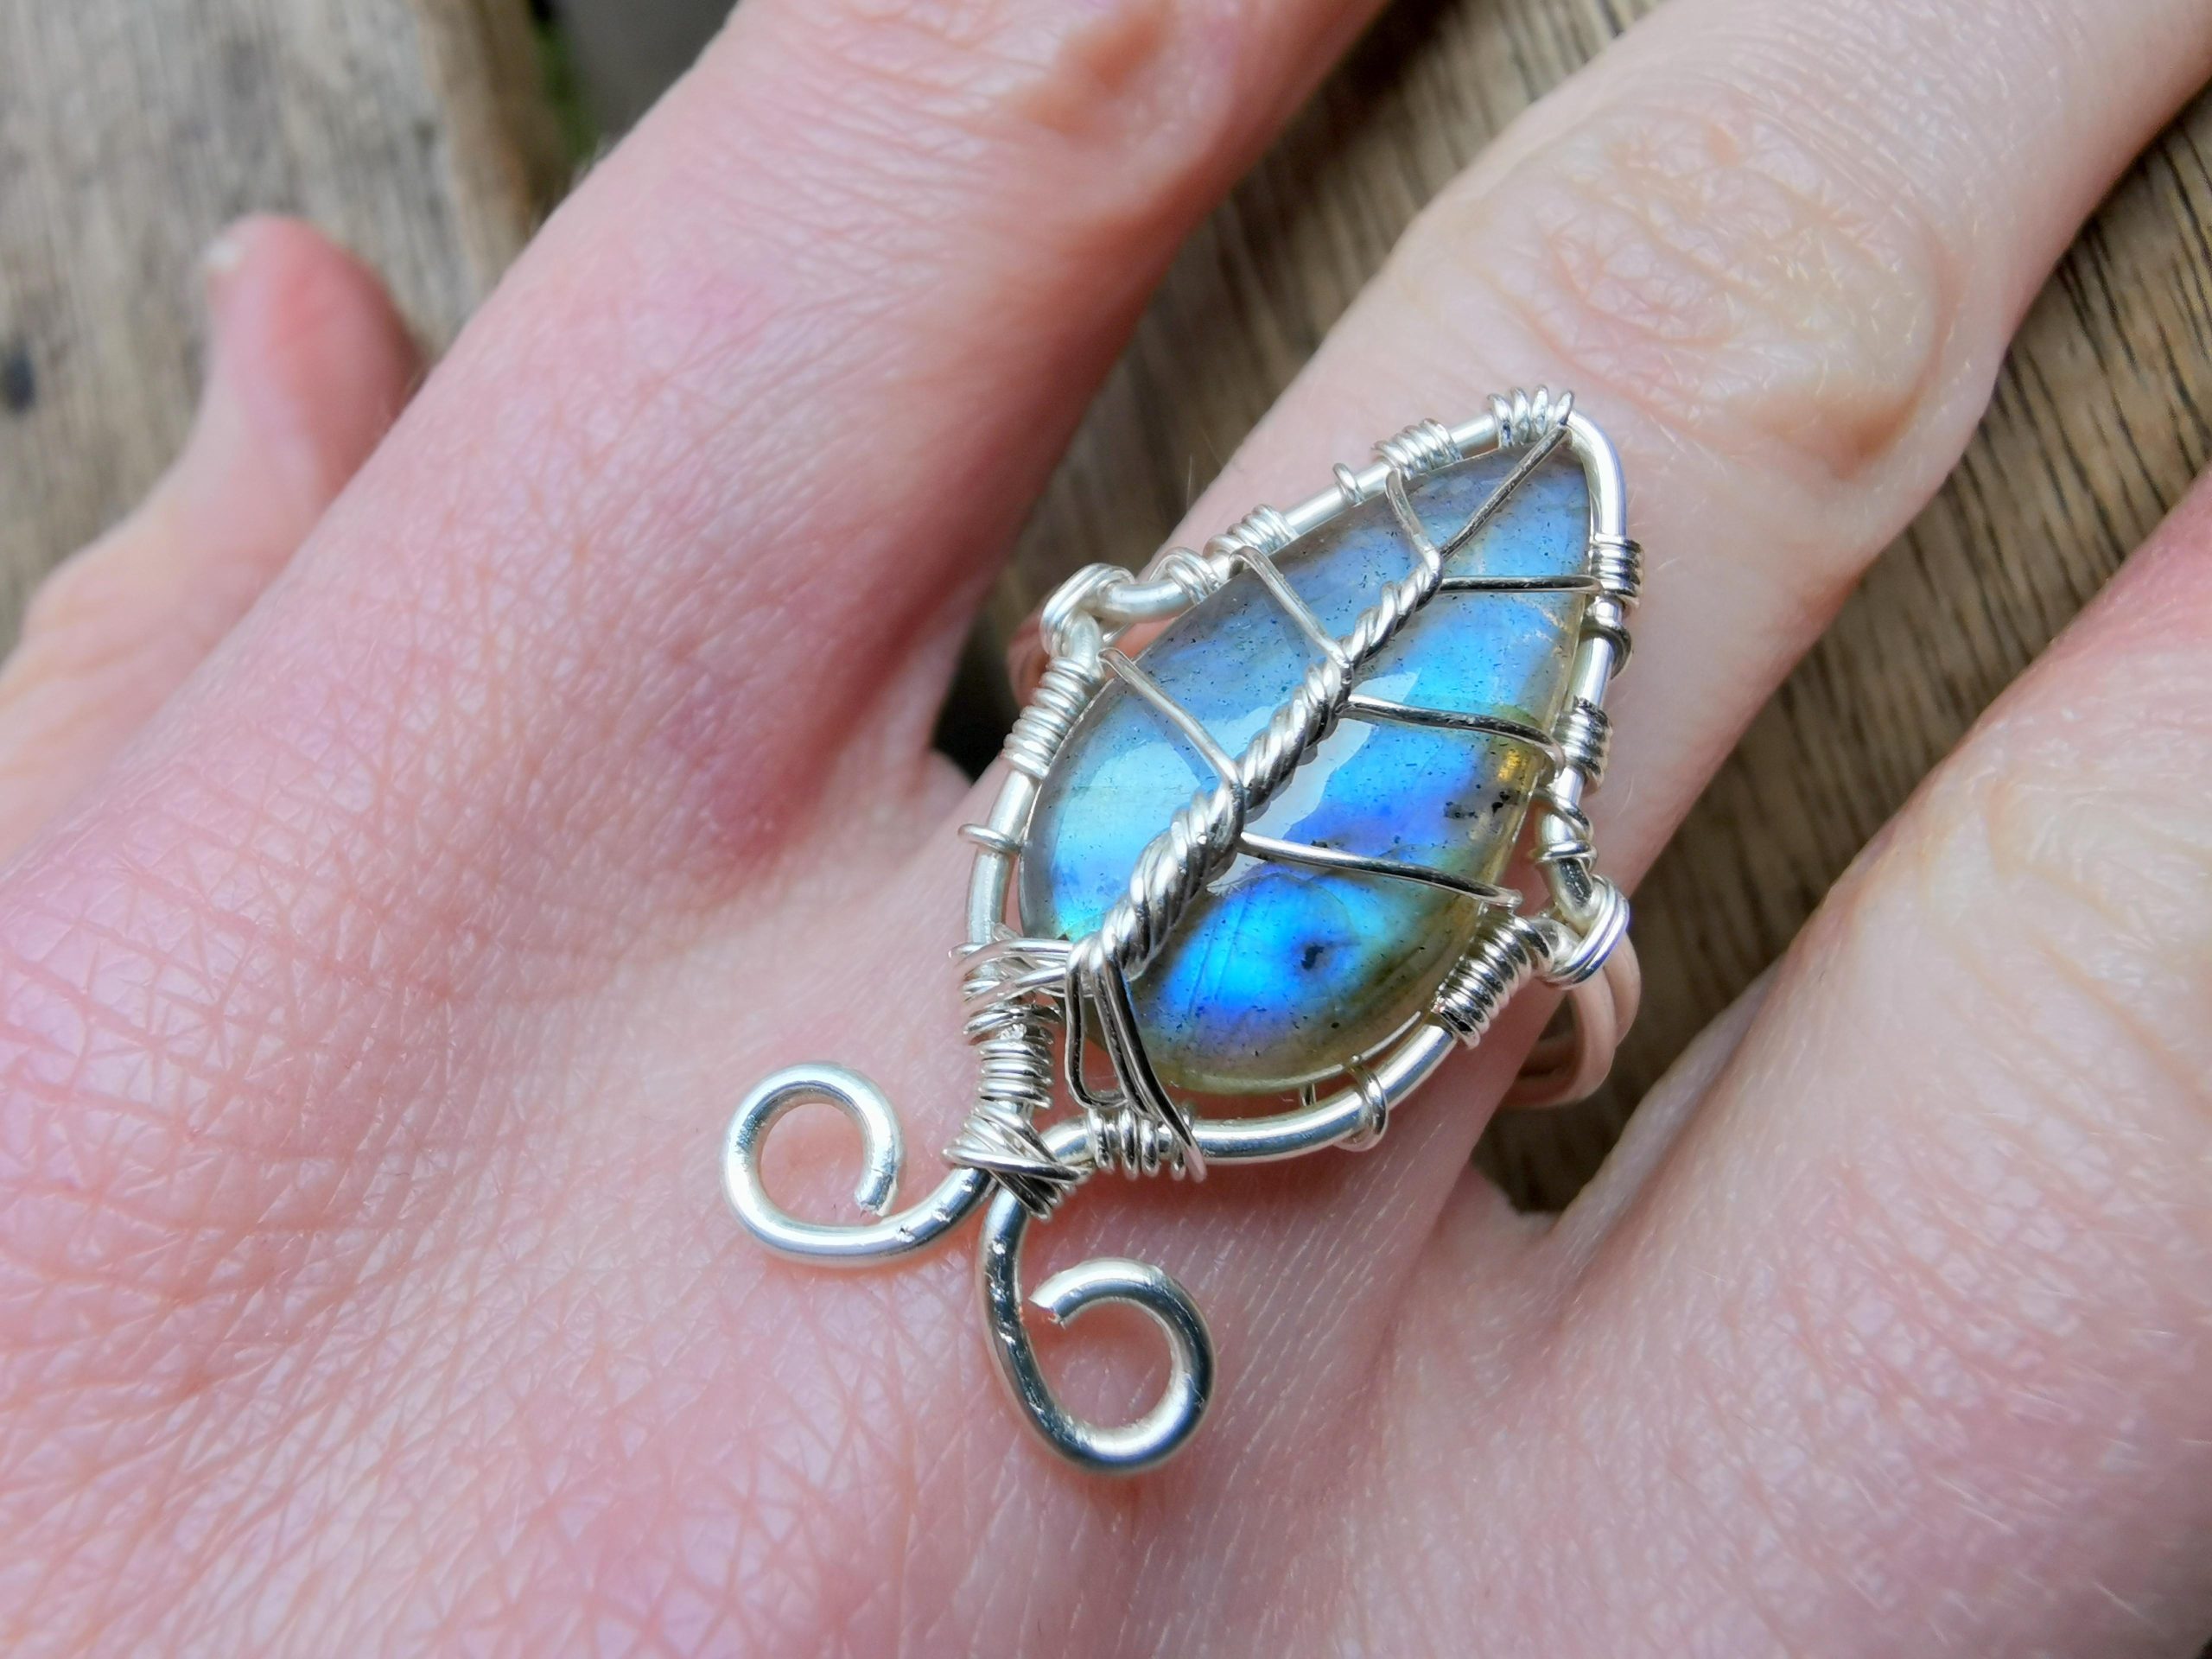 I made a leaf ring with a labradorite gemstone and wire. Stats: +20 % stamina while touring via the woods, +15% charisma when coping with the elves.